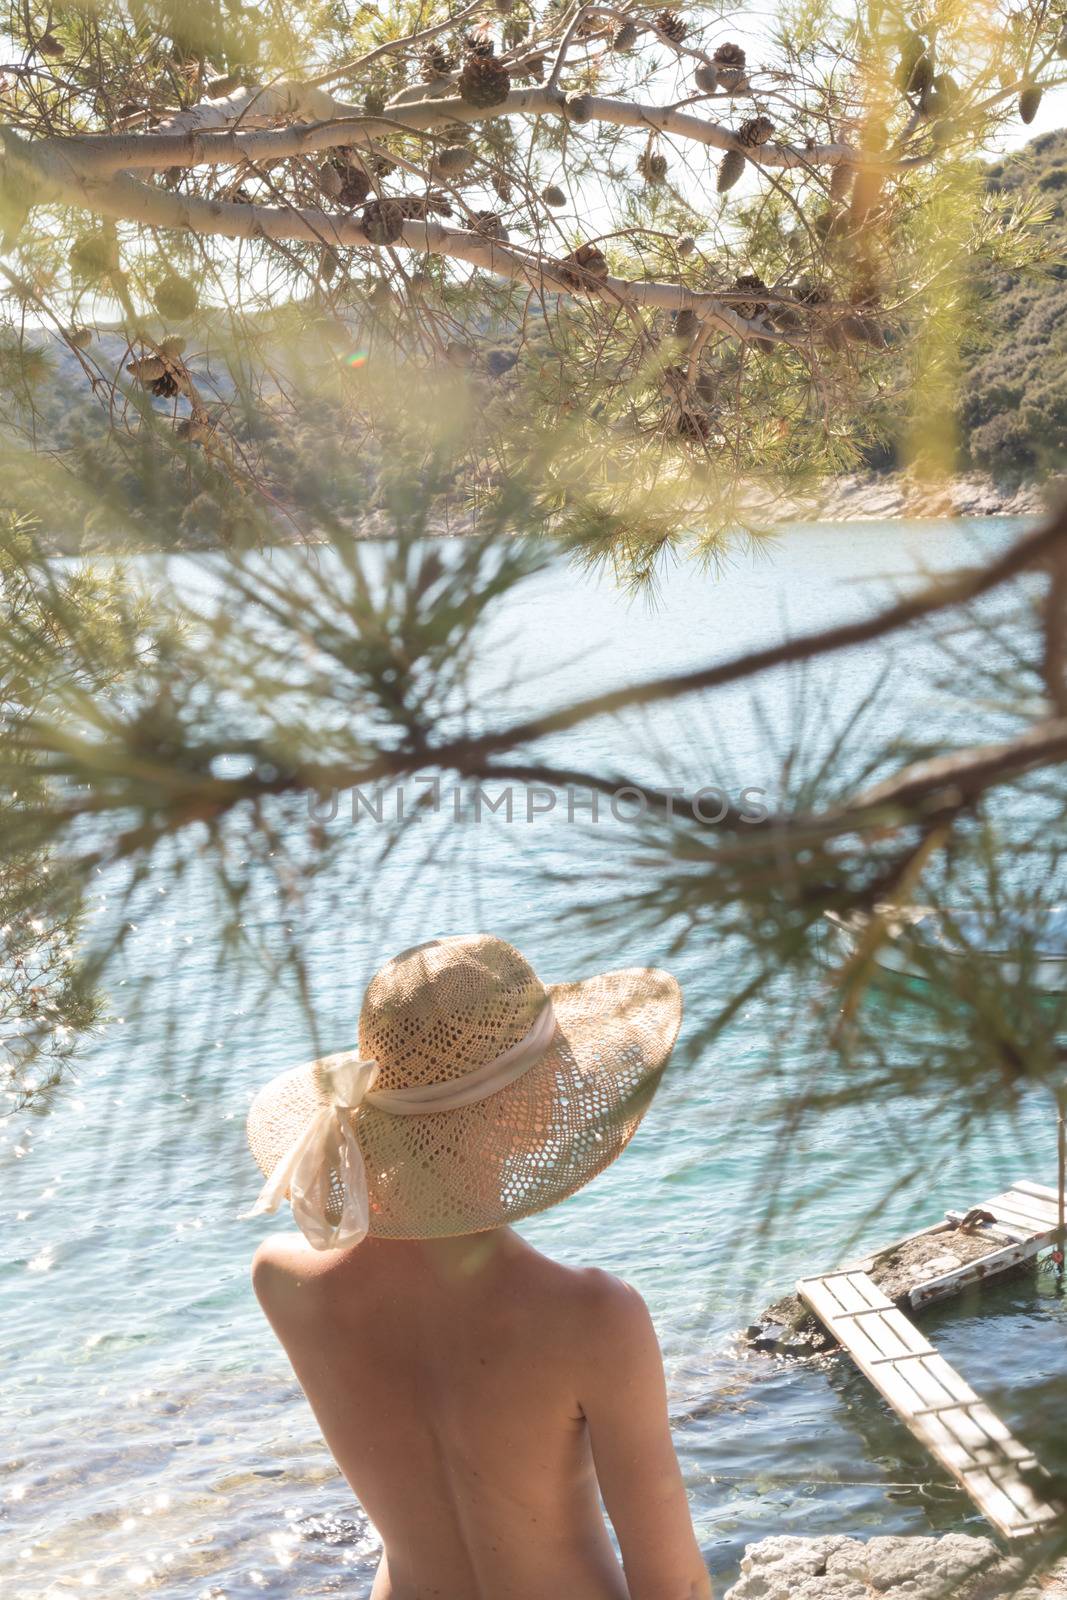 Rear view of topless beautiful woman wearing nothing but straw sun hat realaxing on wild coast of Adriatic sea on a beach in shade of pine tree. Relaxed healthy lifestyle concept.